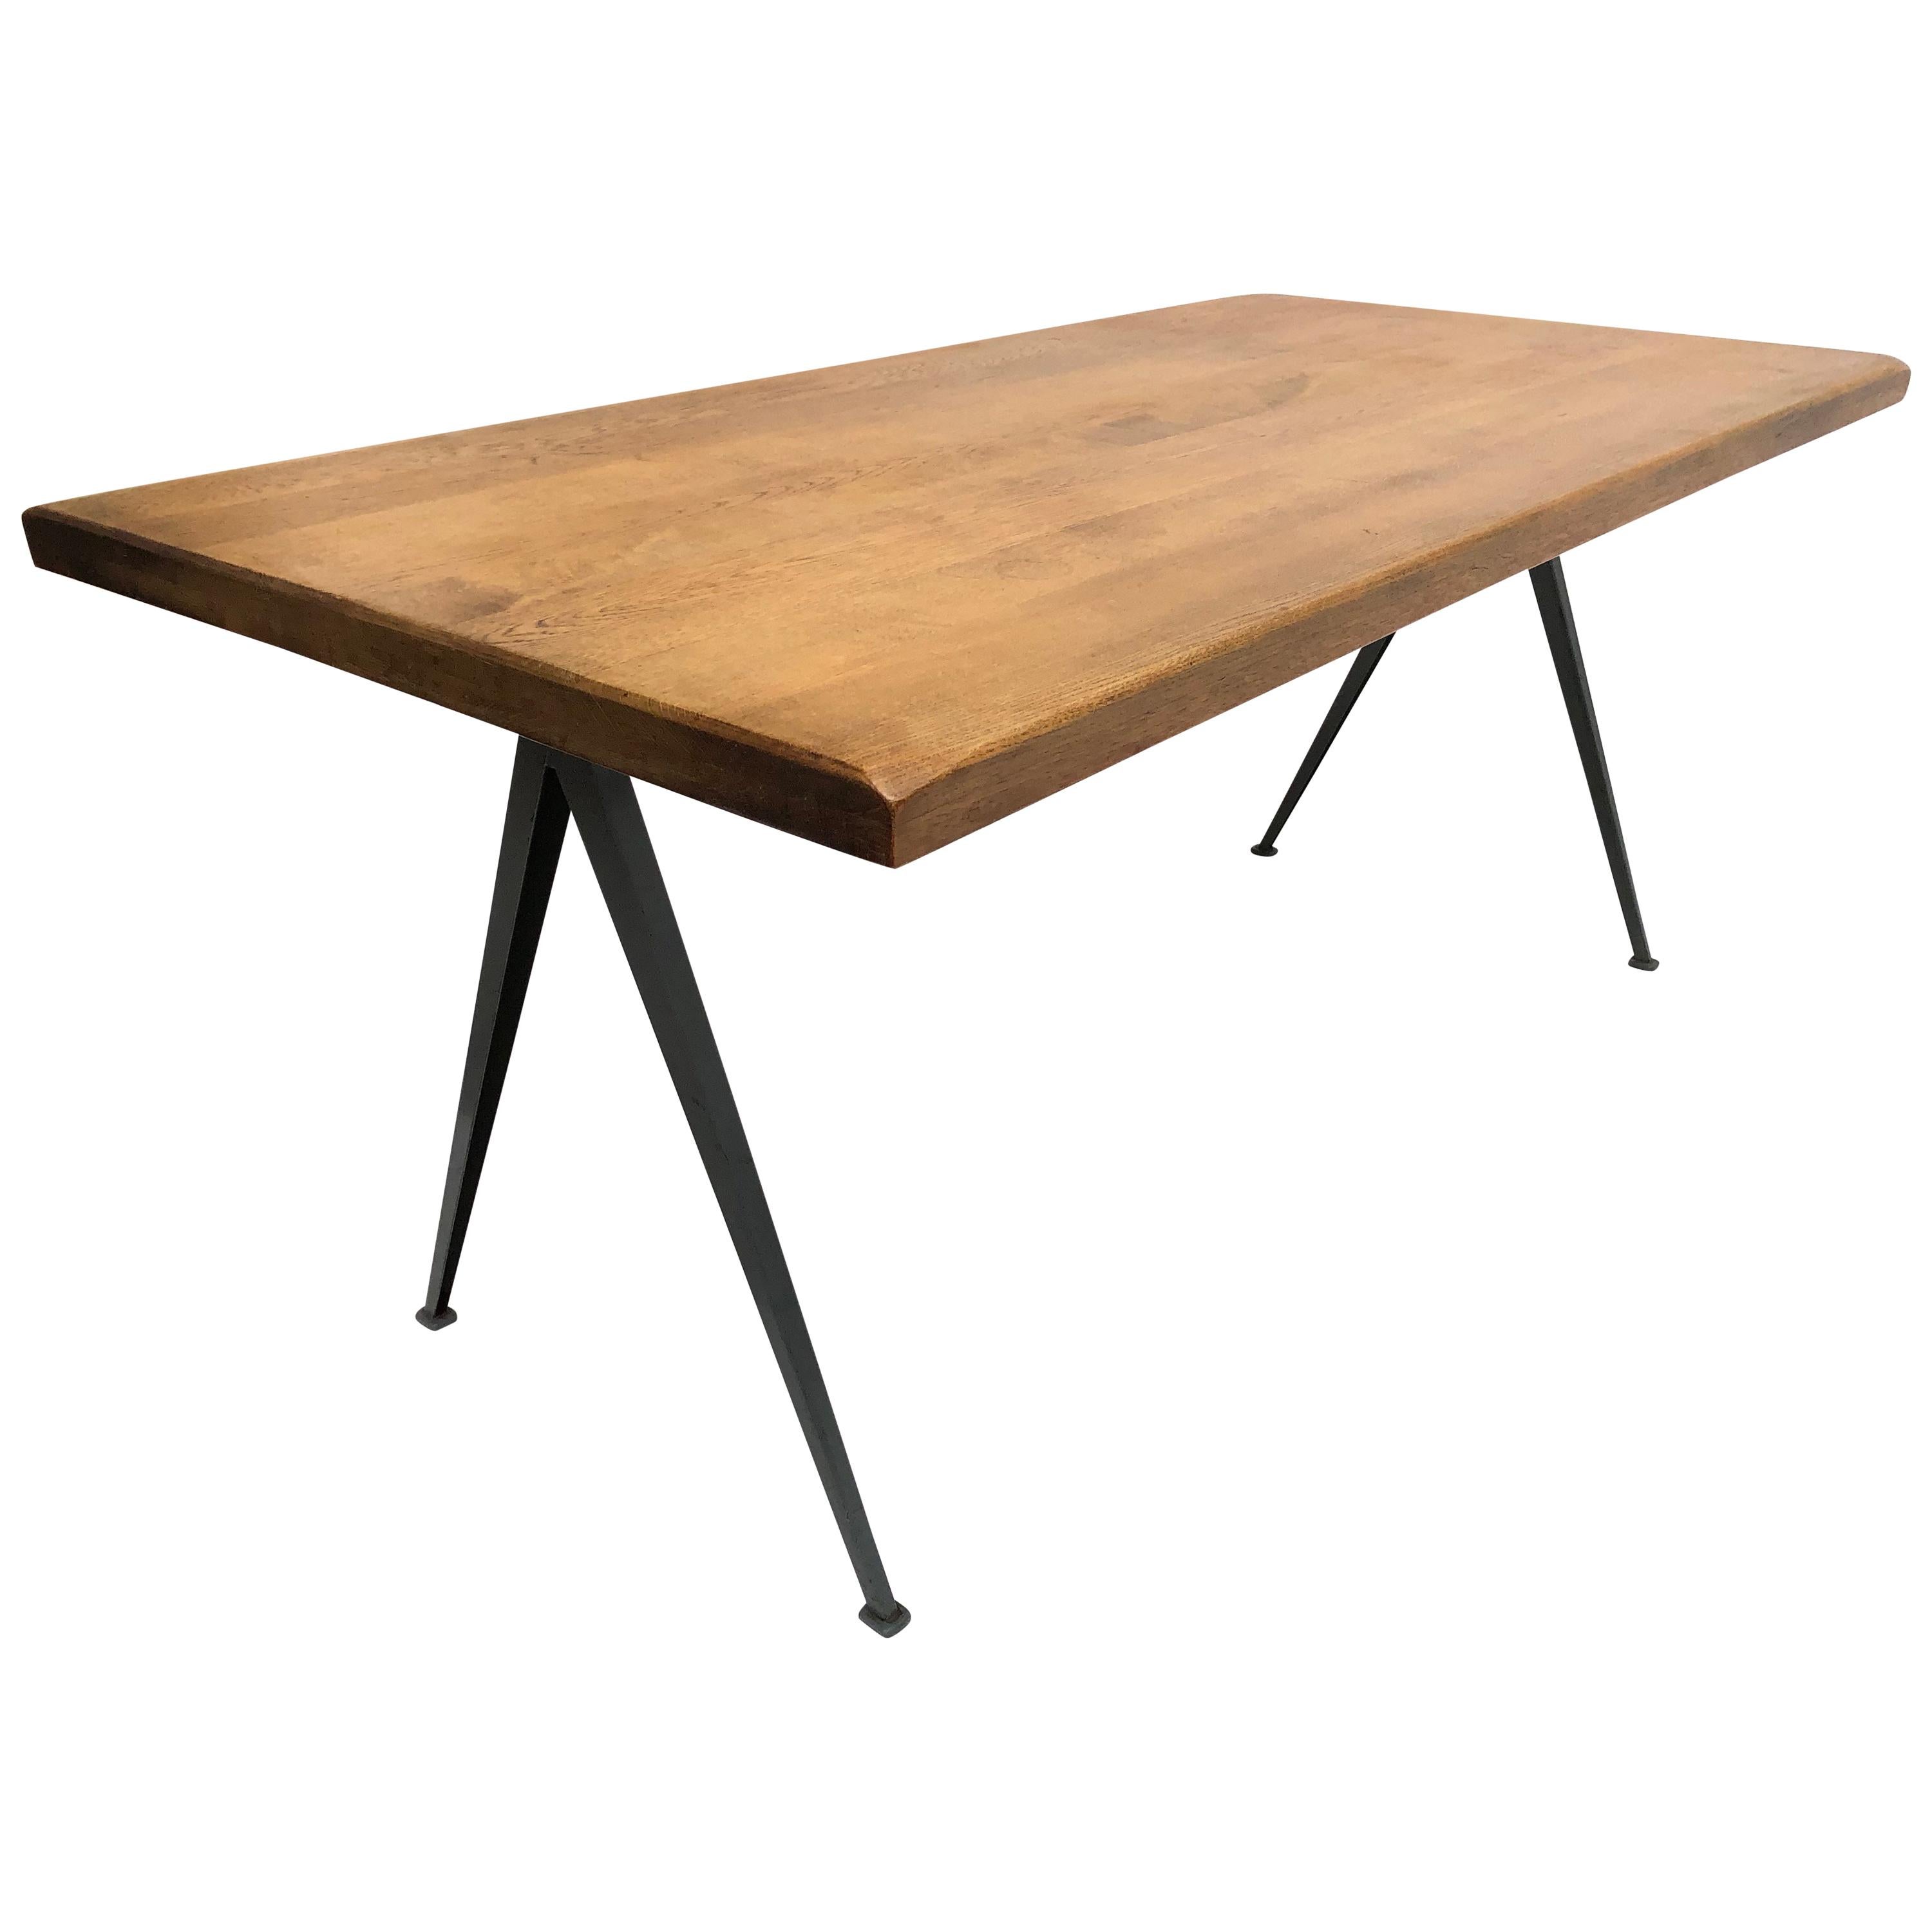 Wim Rietveld 1st Edition Oak Top 'Pyramid' Compass Table Ahrend the Cirkel 1959